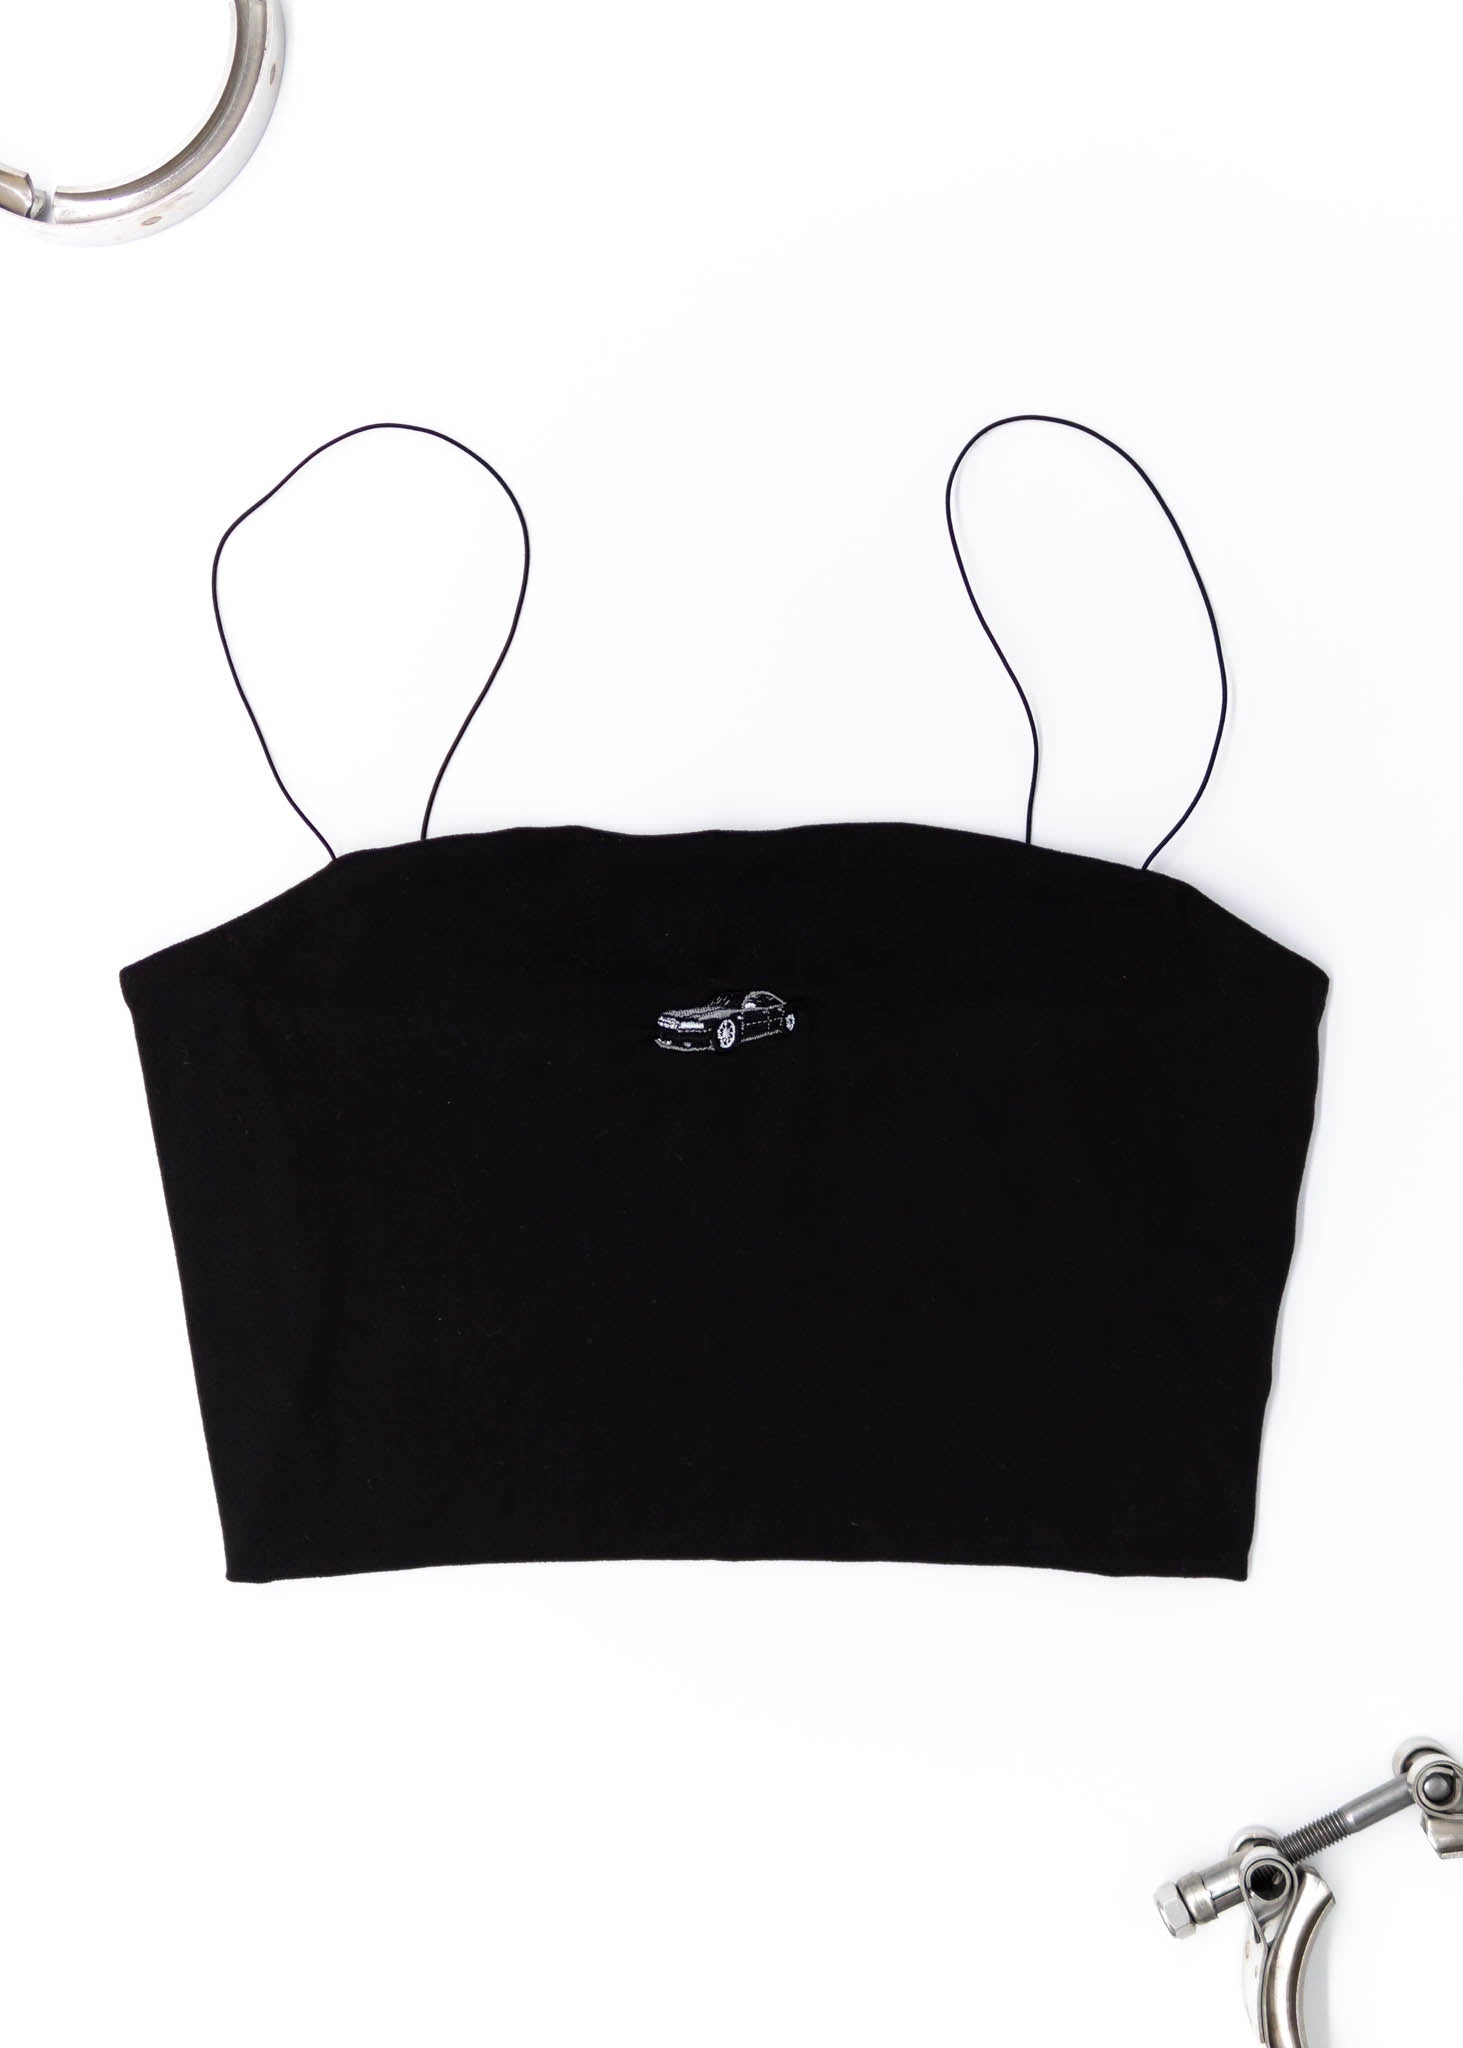 A black Audi crop top for women. Photo is a front view of the shirt with an embroidered Black Audi D2 S8. Fabric composition is 100% polyester. The material is very soft, comfortable, non-transparent. The style of this shirt is sleeveless, spaghetti straps, with a straight neckline.